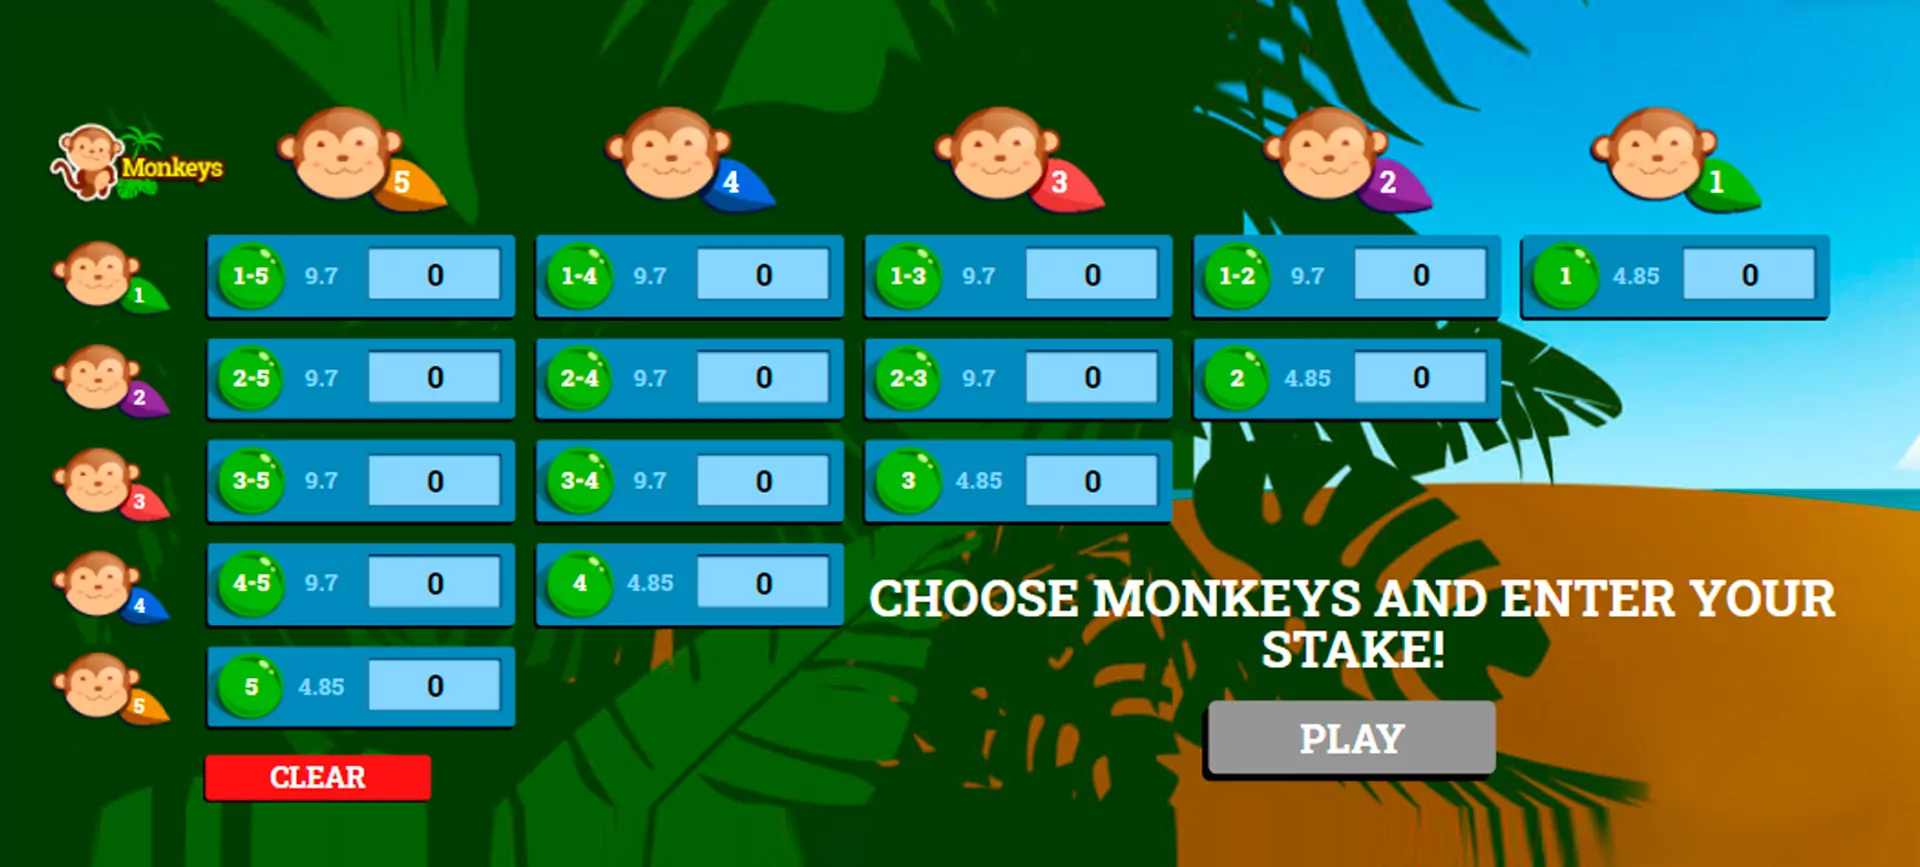 Play online in the Monkeys game.